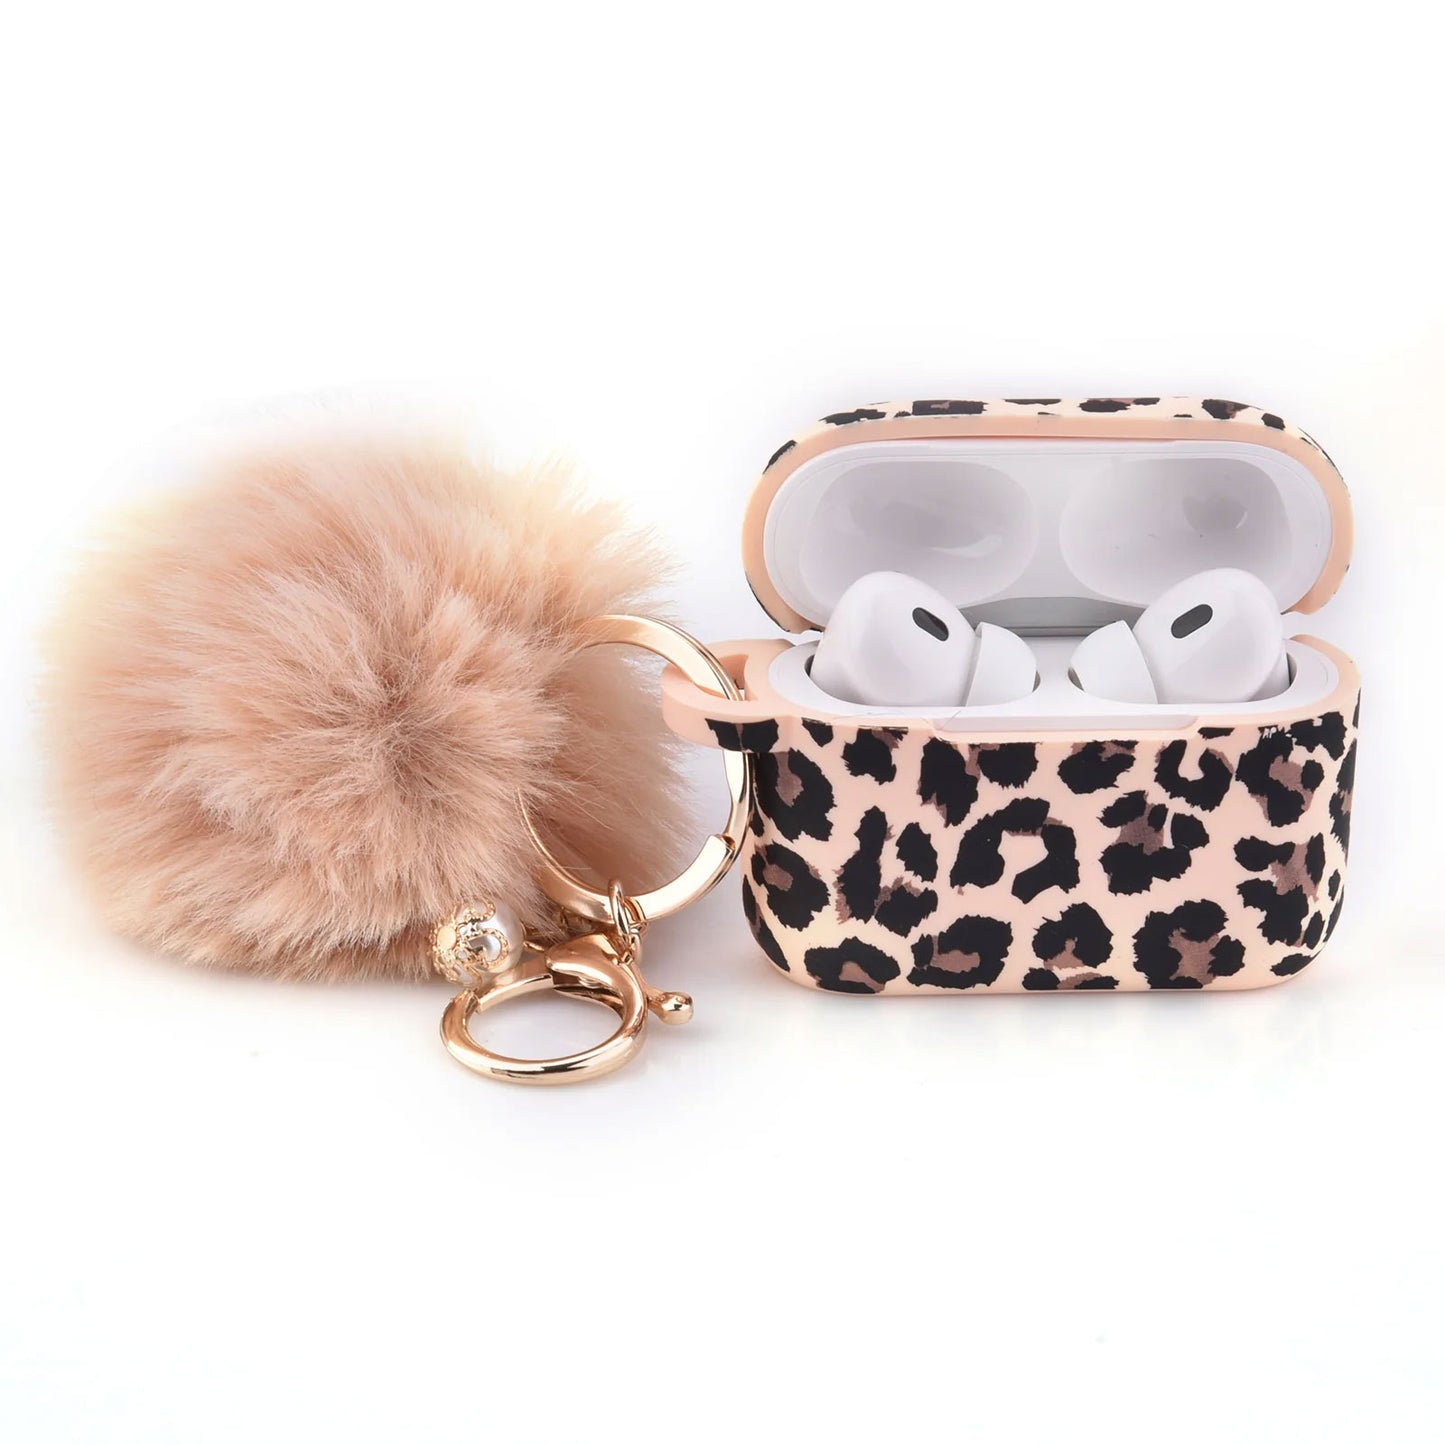 Case for AirPod Pro 2 Silicone Cover with Pom Pom Keychain